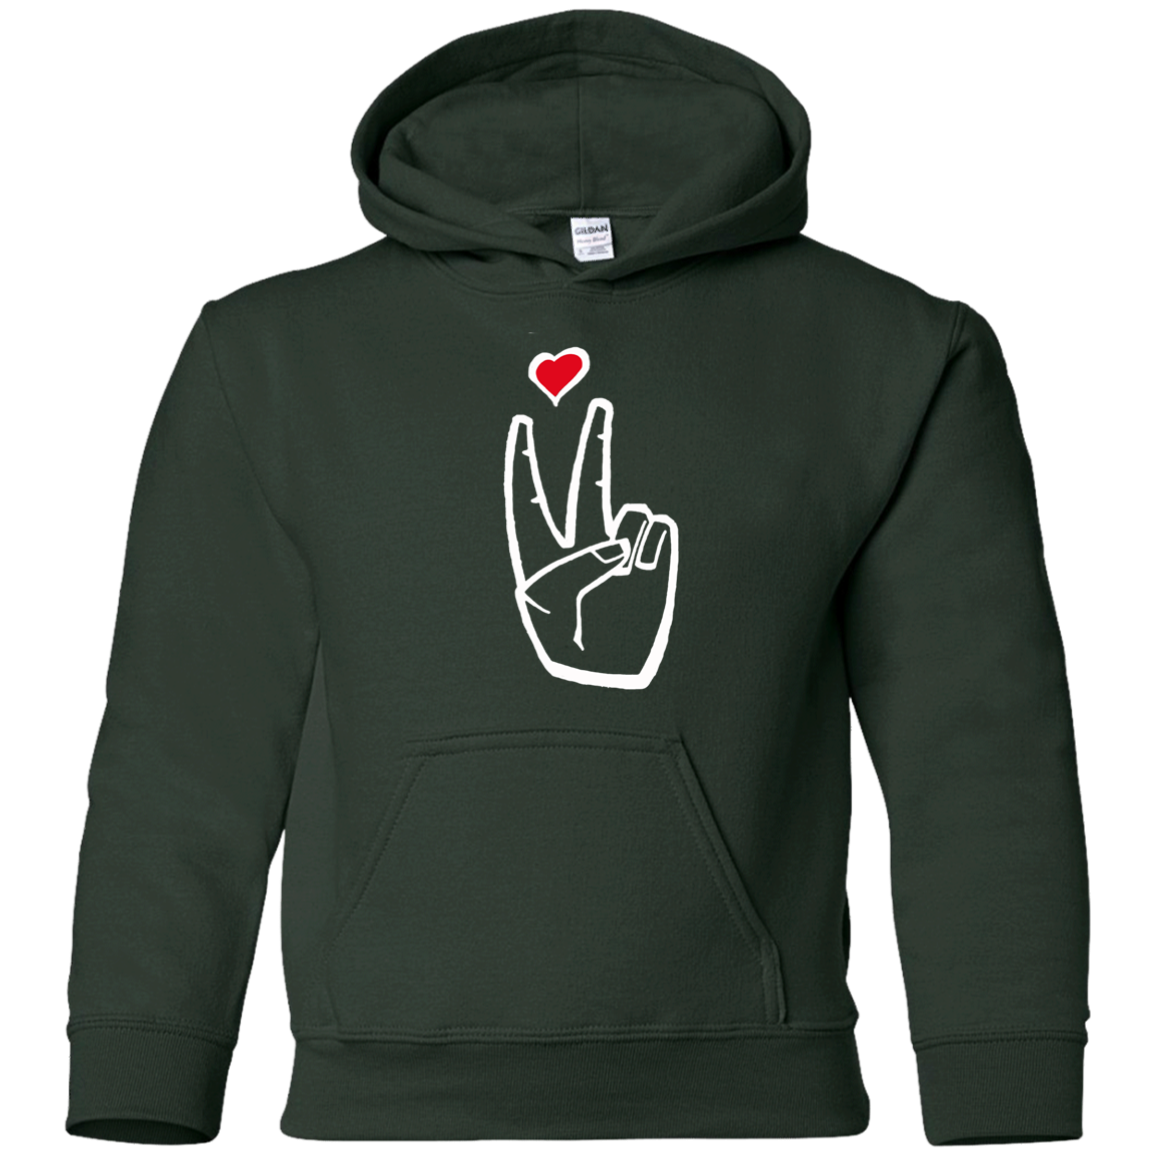 LoveAbove Youth Hoodie